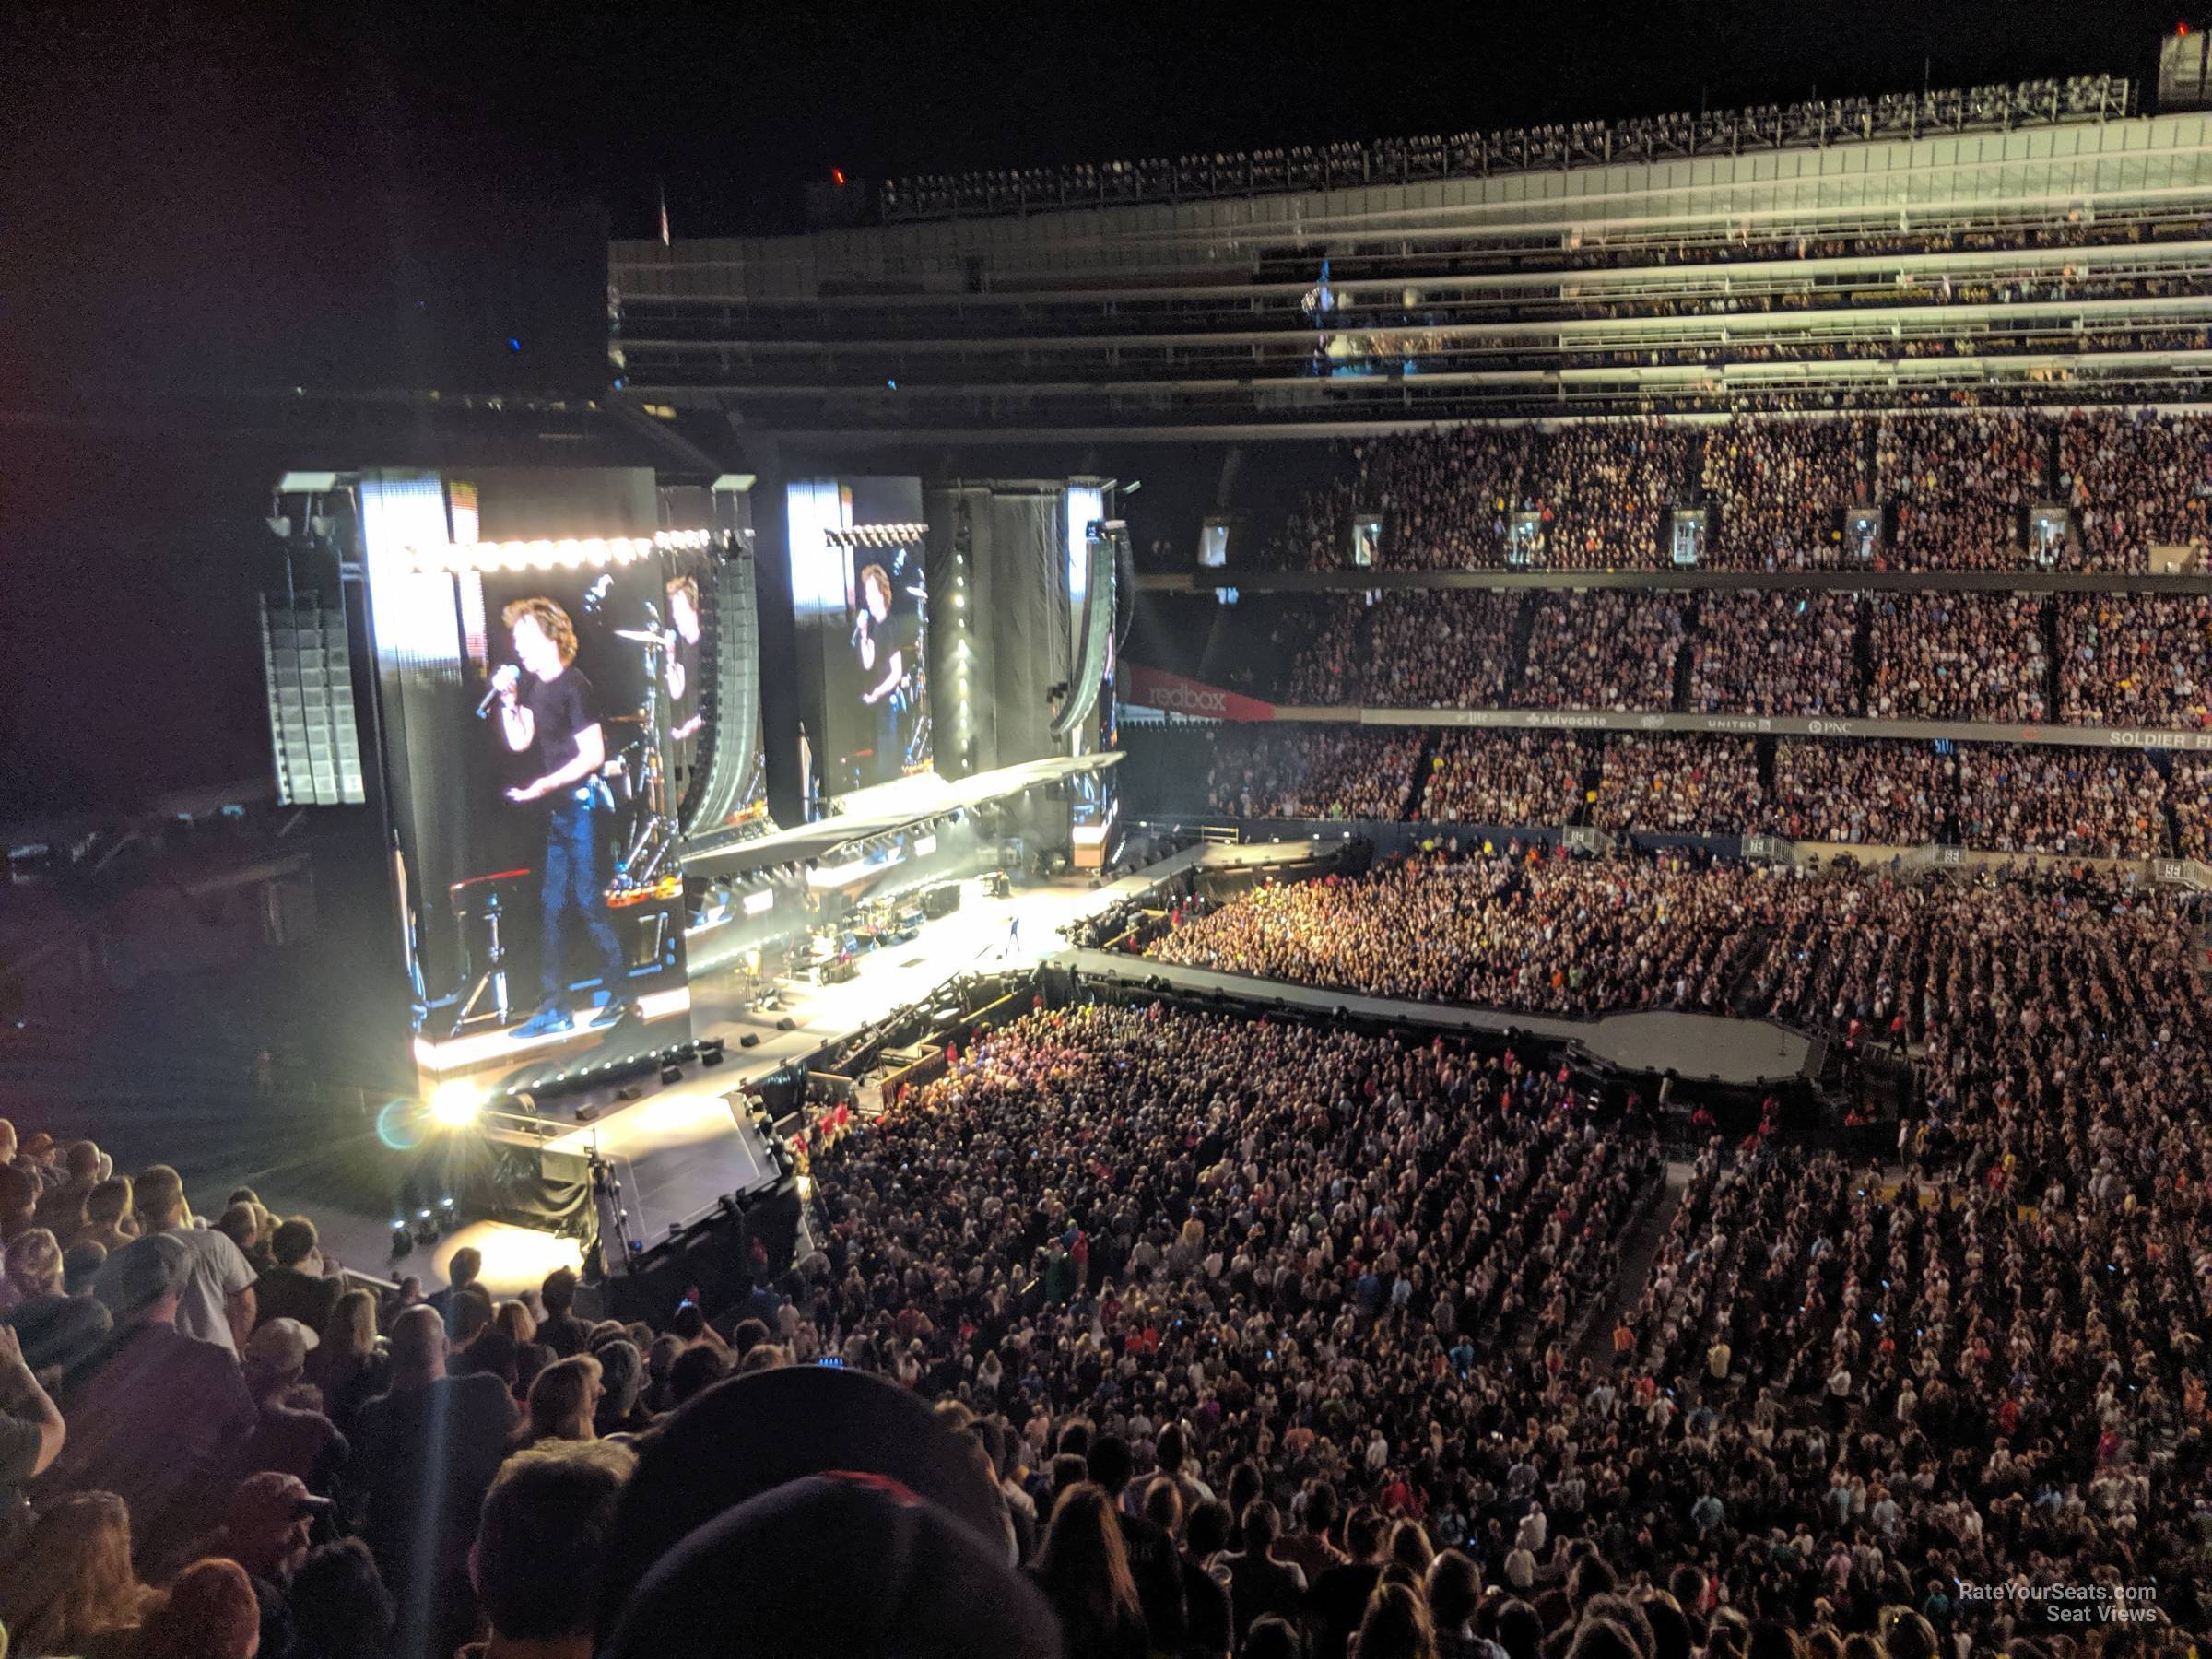 section 339, row 15 seat view  for concert - soldier field